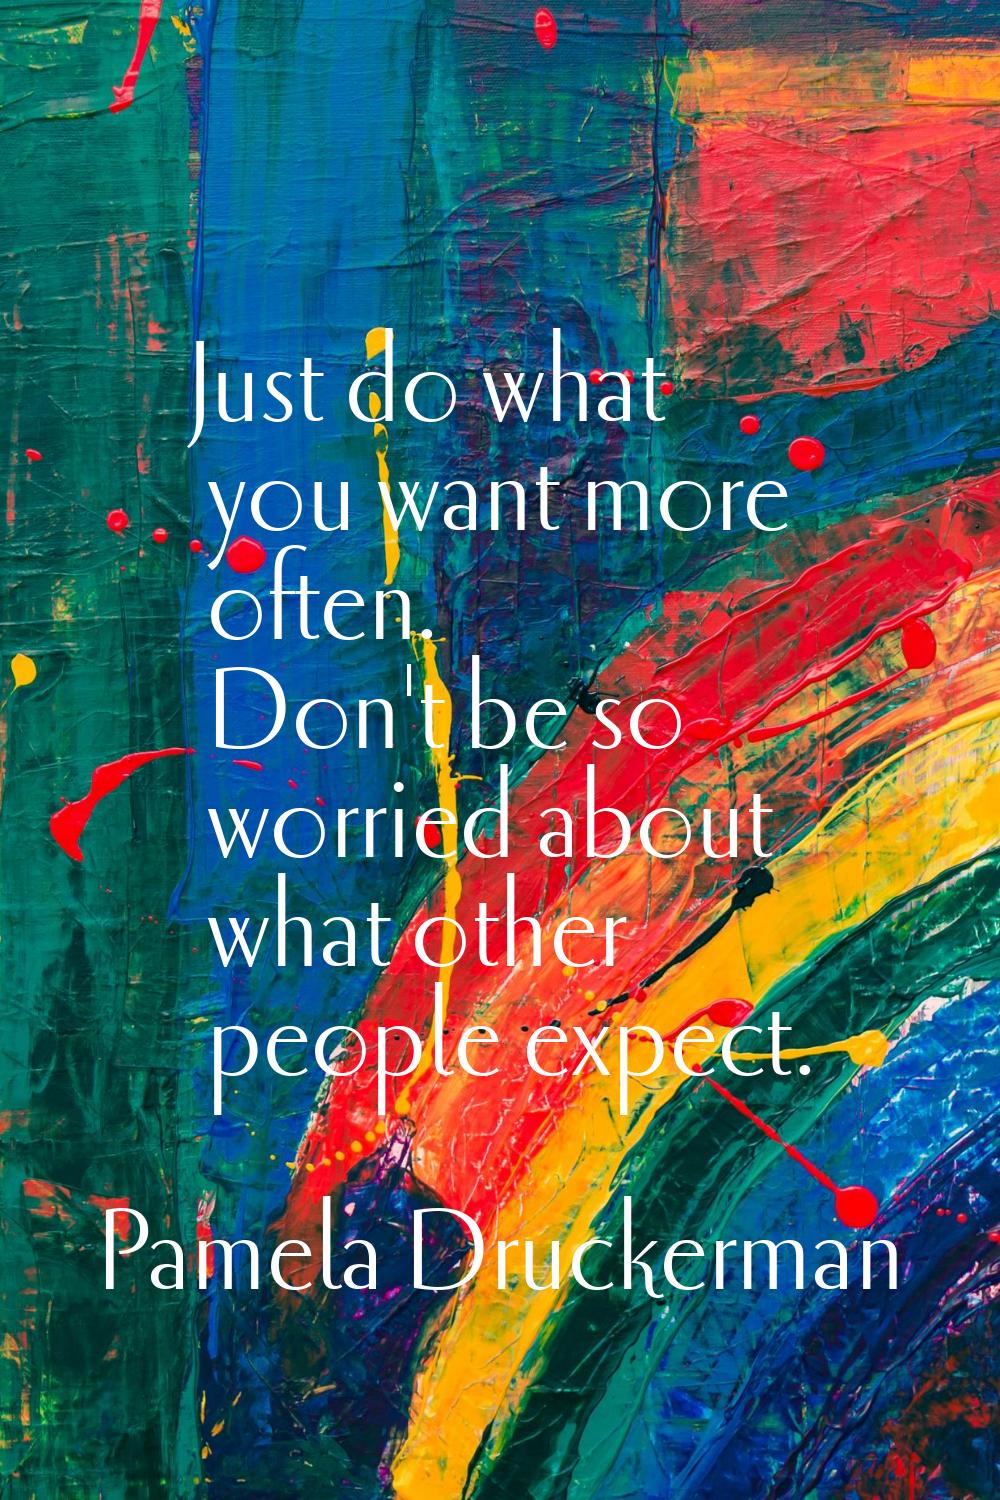 Just do what you want more often. Don't be so worried about what other people expect.